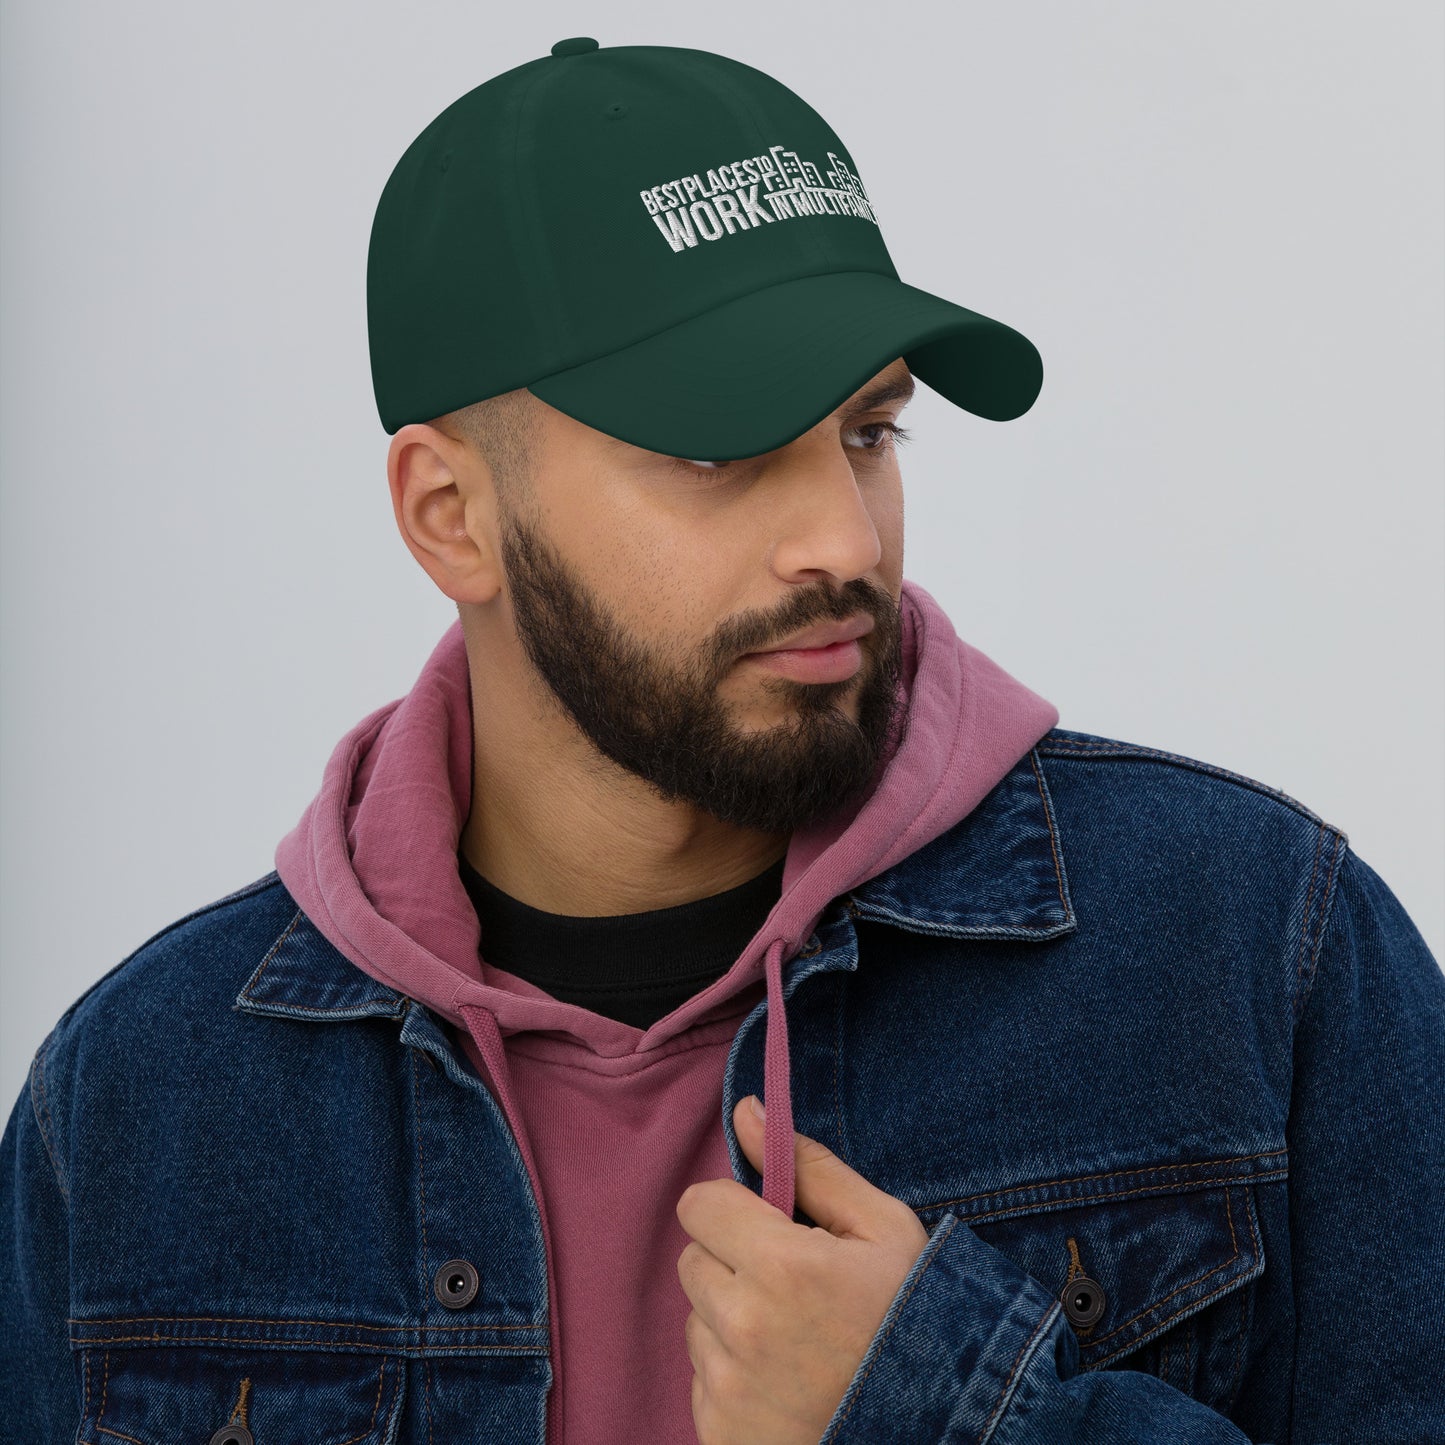 Best Places to Work Multifamily® Dad hat